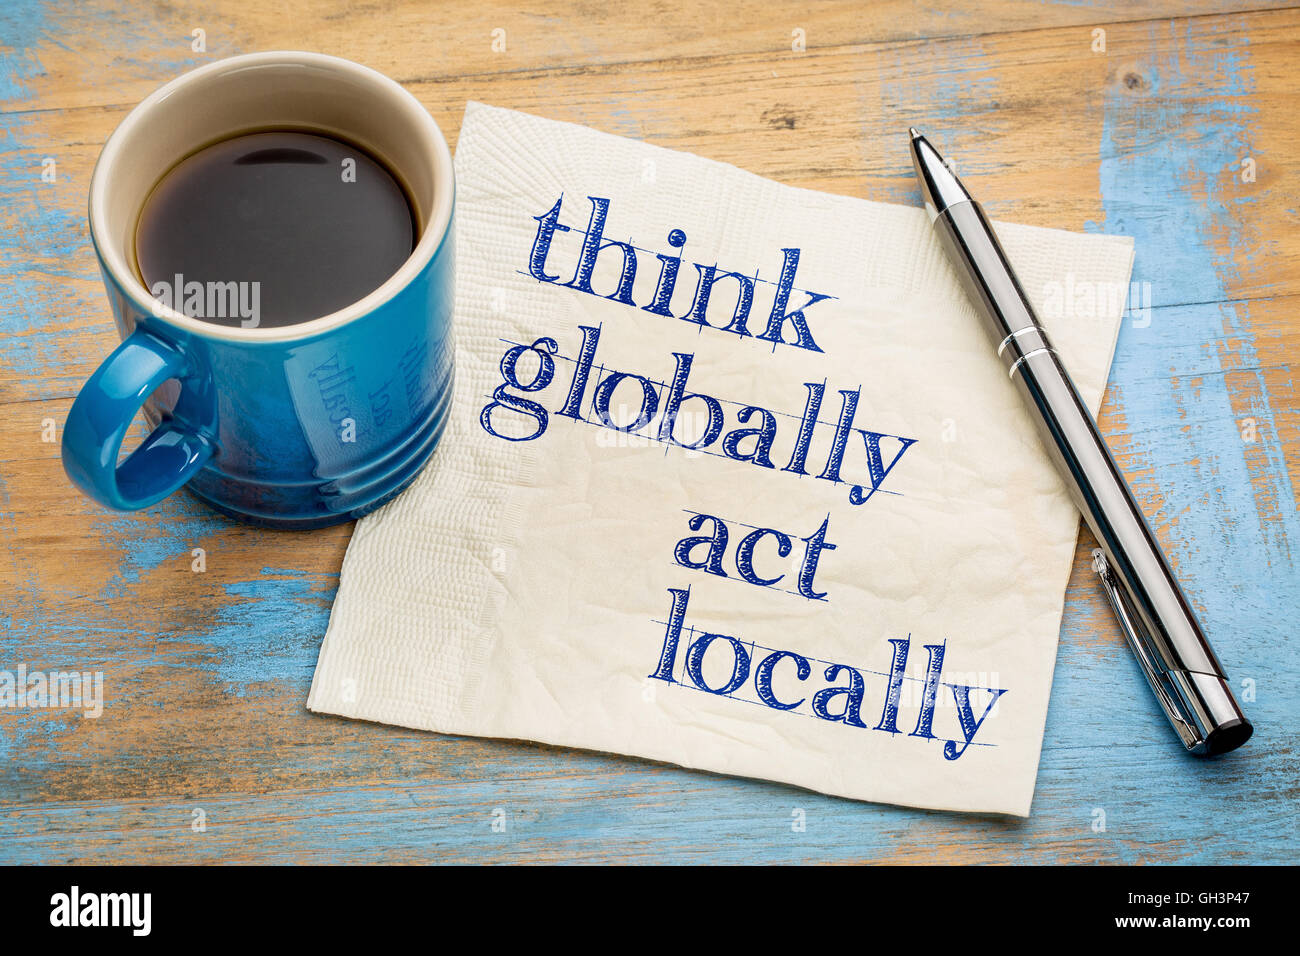 Think globally, act locally reminder - handwriting on a napkin with a cup of espresso coffee Stock Photo